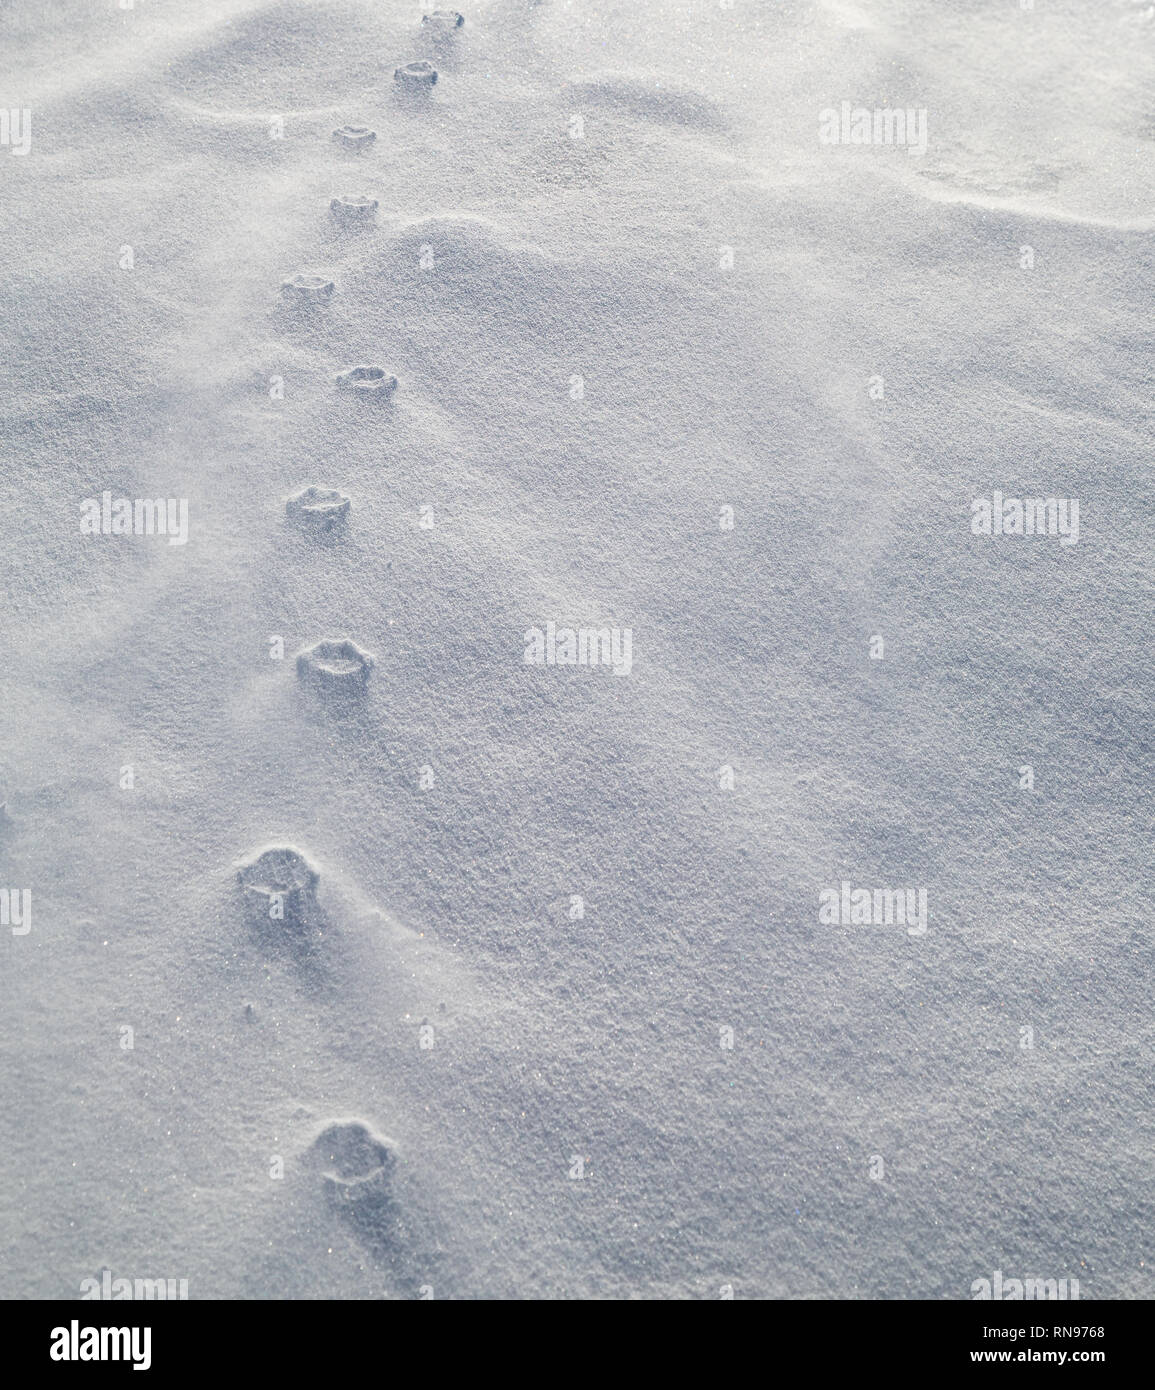 Haute relief of a dog`s paw prints in blowing snow. Strong winds have eroded the loose snow around the compressed paw prints. Stock Photo